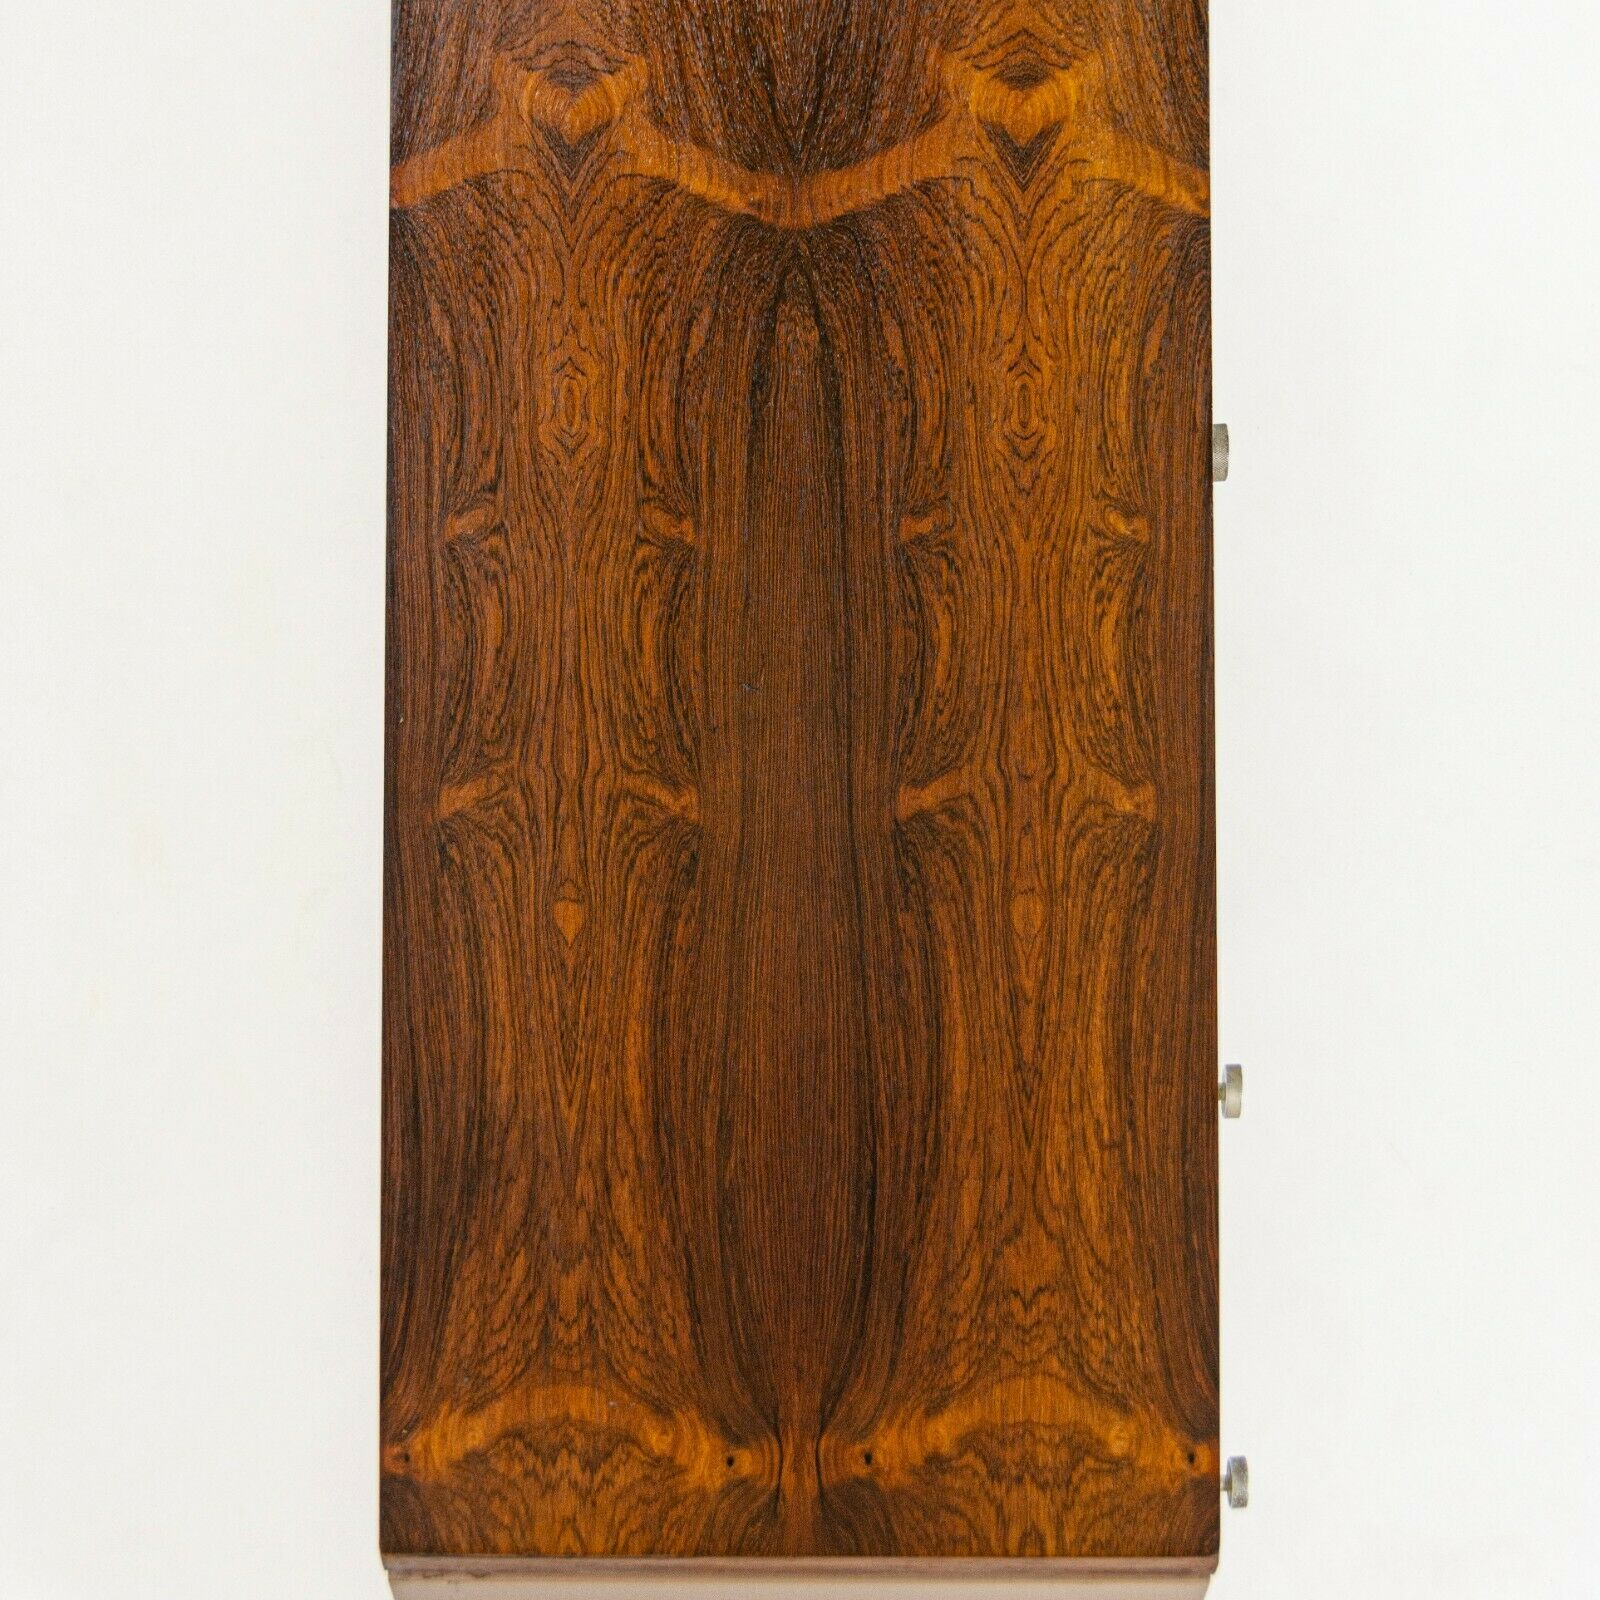 1960 Gerald Luss Rosewood & Metal Credenza Cabinet Once Attributed to Eames & IBM Pavilion